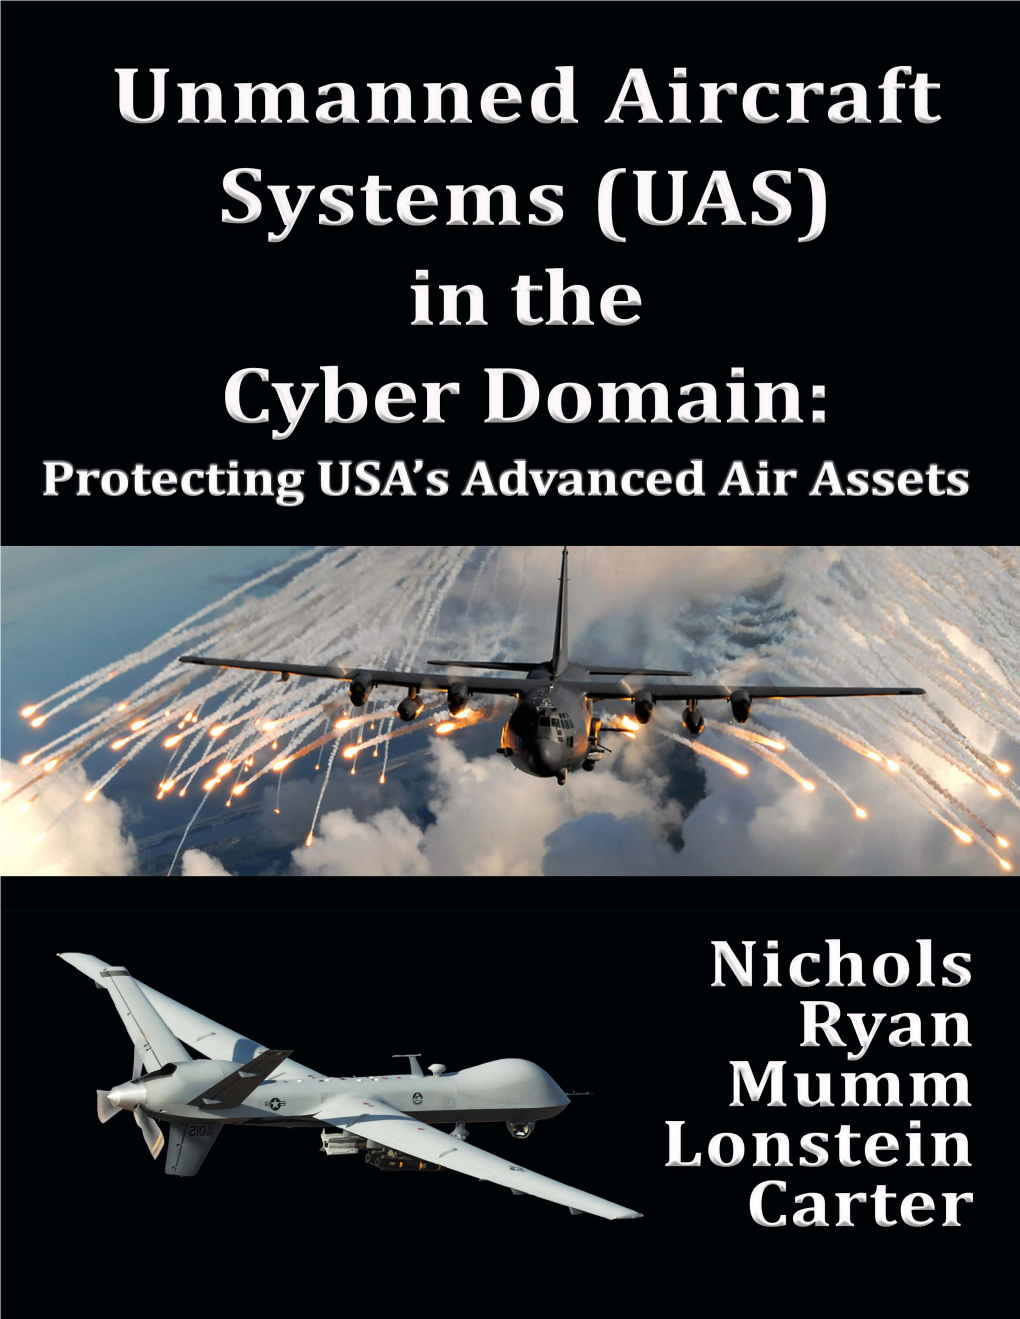 Unmanned Aircraft Systems (Uas) in the Cyber Domain: Protecting Usa's Advanced Air Assets